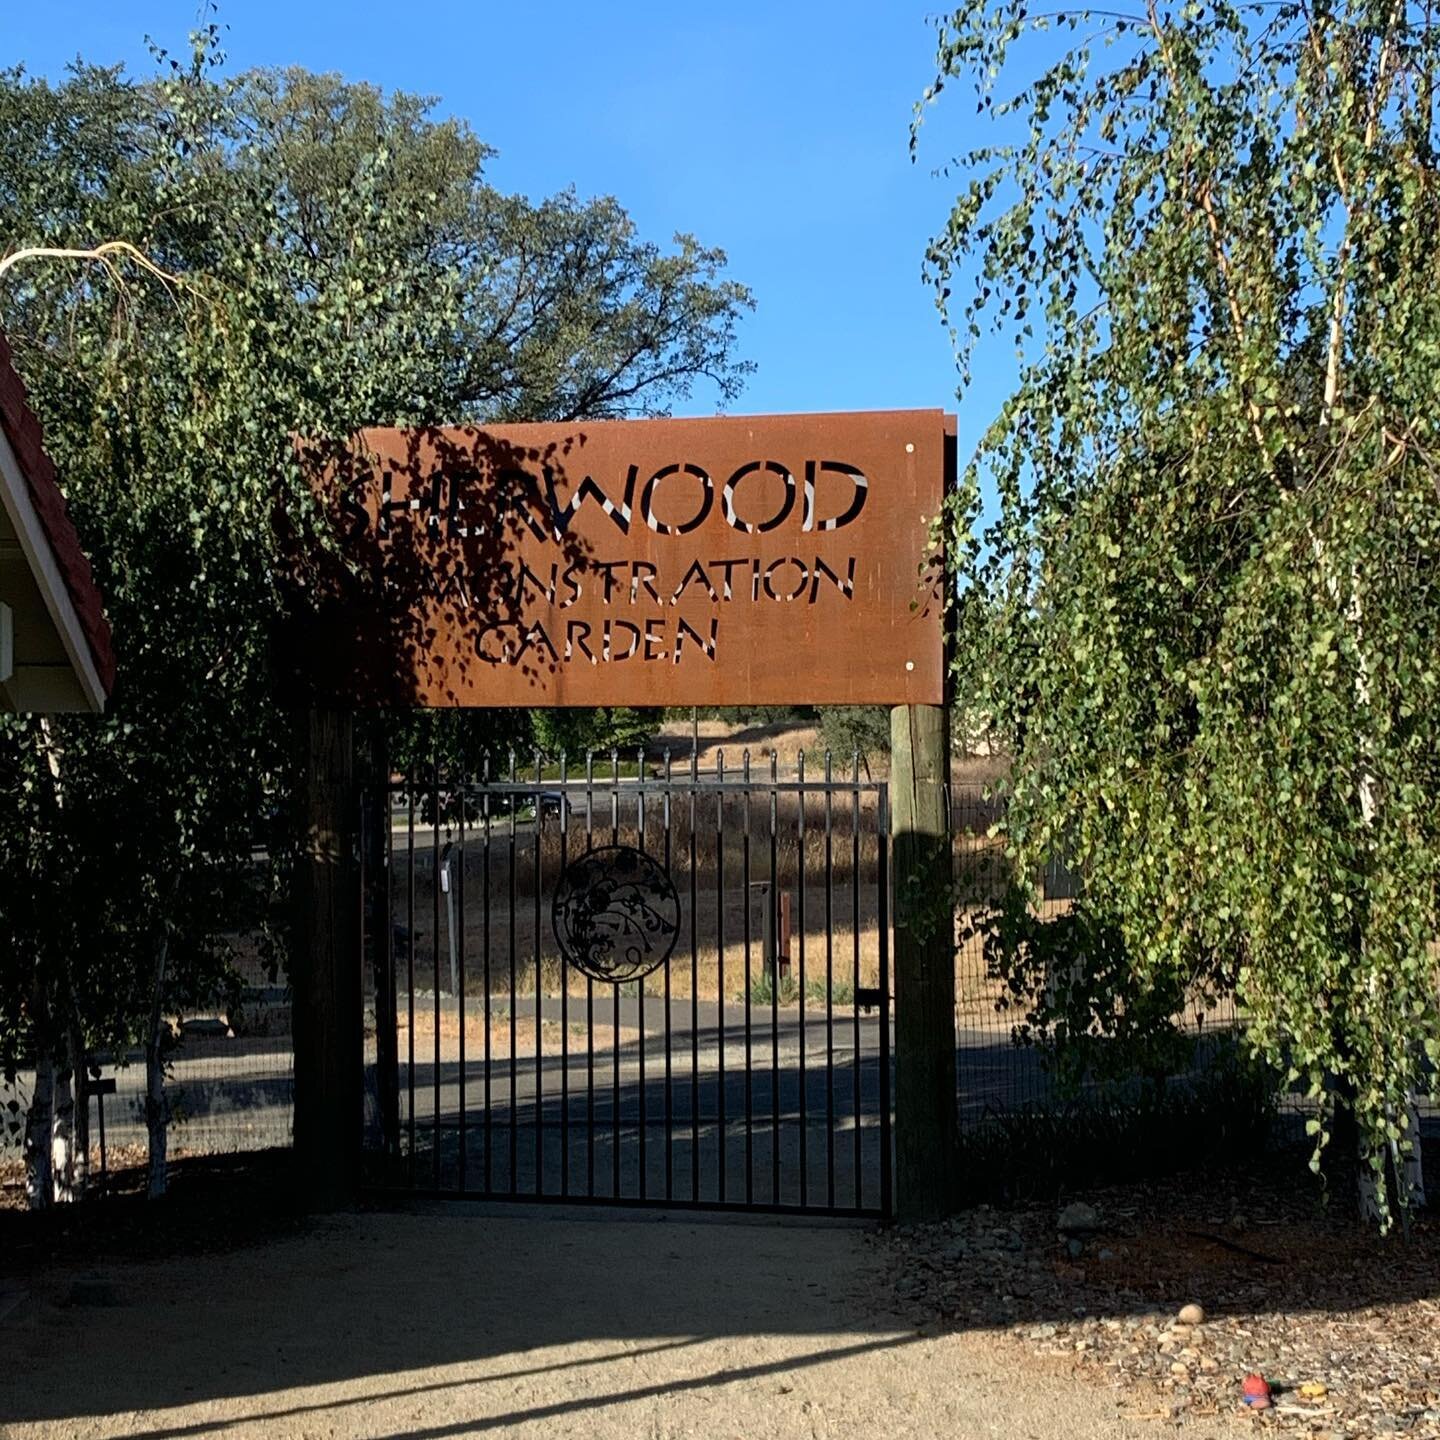 It&rsquo;s a beautiful day in the garden! 🌻 WFED Site-Visit Committee and Cabinet members were treated to a beautiful morning visit at the @sherwooddemonstrationgarden today! 

In 2019, @uccemastergardenerseldorado received WFED grant funding to con